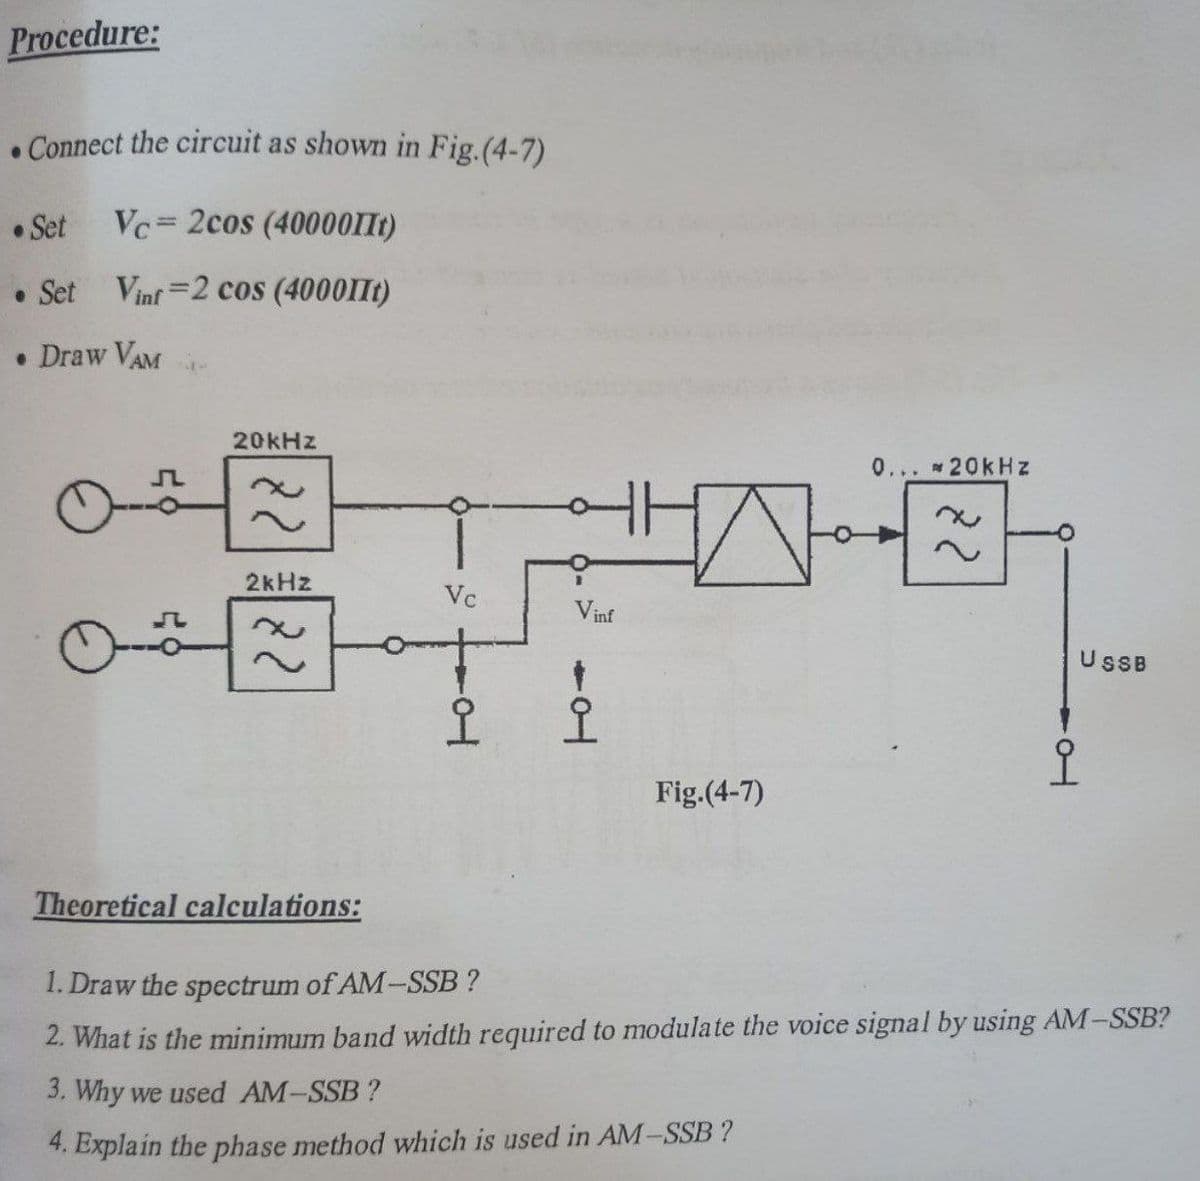 Procedure:
. Connect the circuit as shown in Fig.(4-7)
• Set
Vc= 2cos (40000IIt)
• Set
Vinf =2 cos (4000II1)
• Draw VAM
20KHZ
0... 20kHz
2kHz
Vc
Vinf
UsB
오오
Fig.(4-7)
Theoretical calculations:
1. Draw the spectrum of AM-SSB ?
2. What is the minimum band width required to modulate the voice signal by using AM-SSB?
3. Why we used AM-SSB?
4. Explain the phase method which is used in AM-SSB ?
